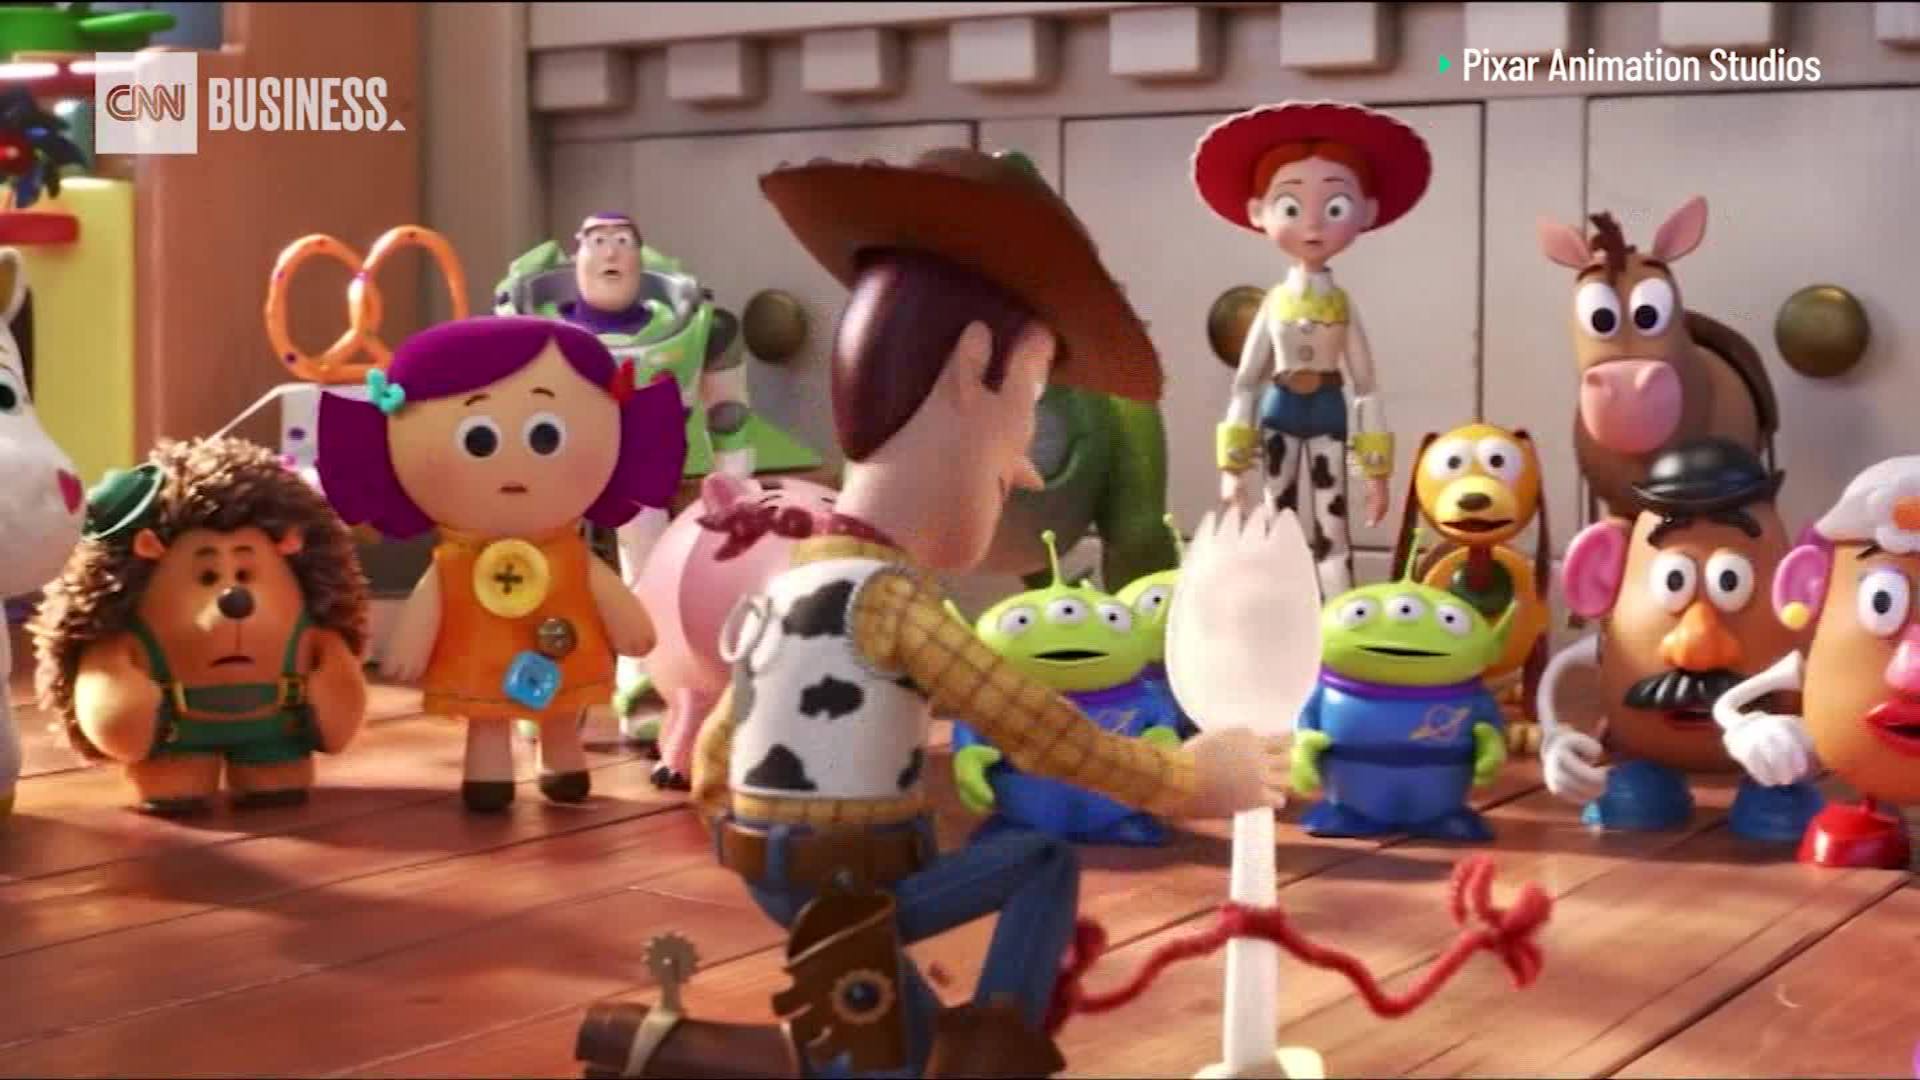 Toy Story 4 Trailer Features New Character Cnn